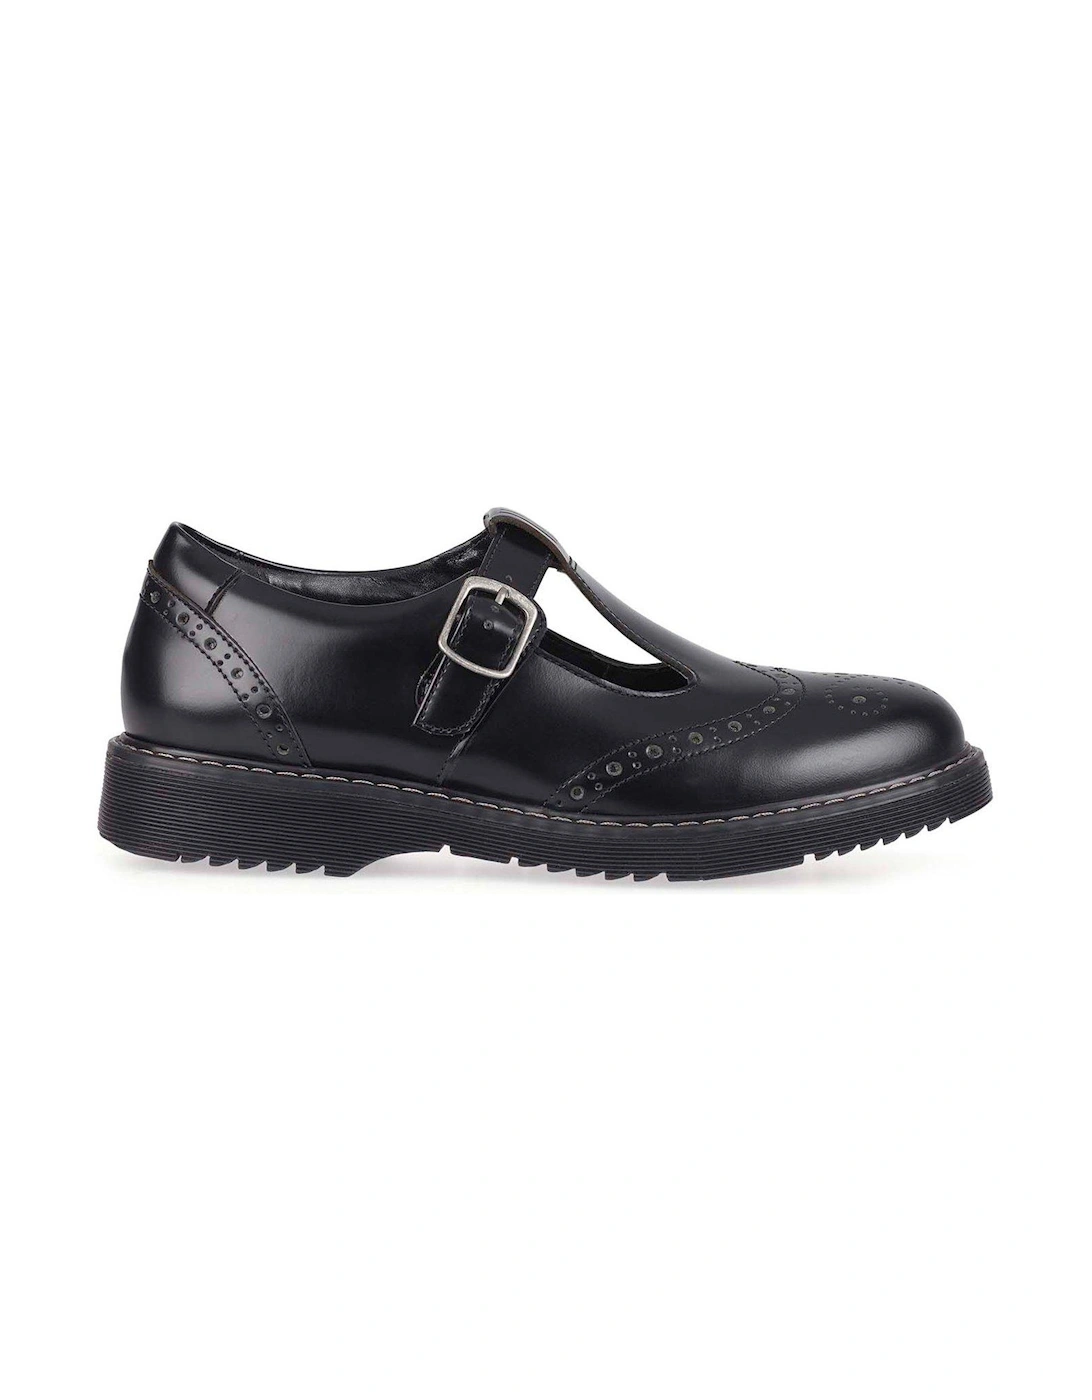 Imagine Girls Leather T-bar Buckle Chunky Sole School Shoes with Brogue Styling - Black, 2 of 1